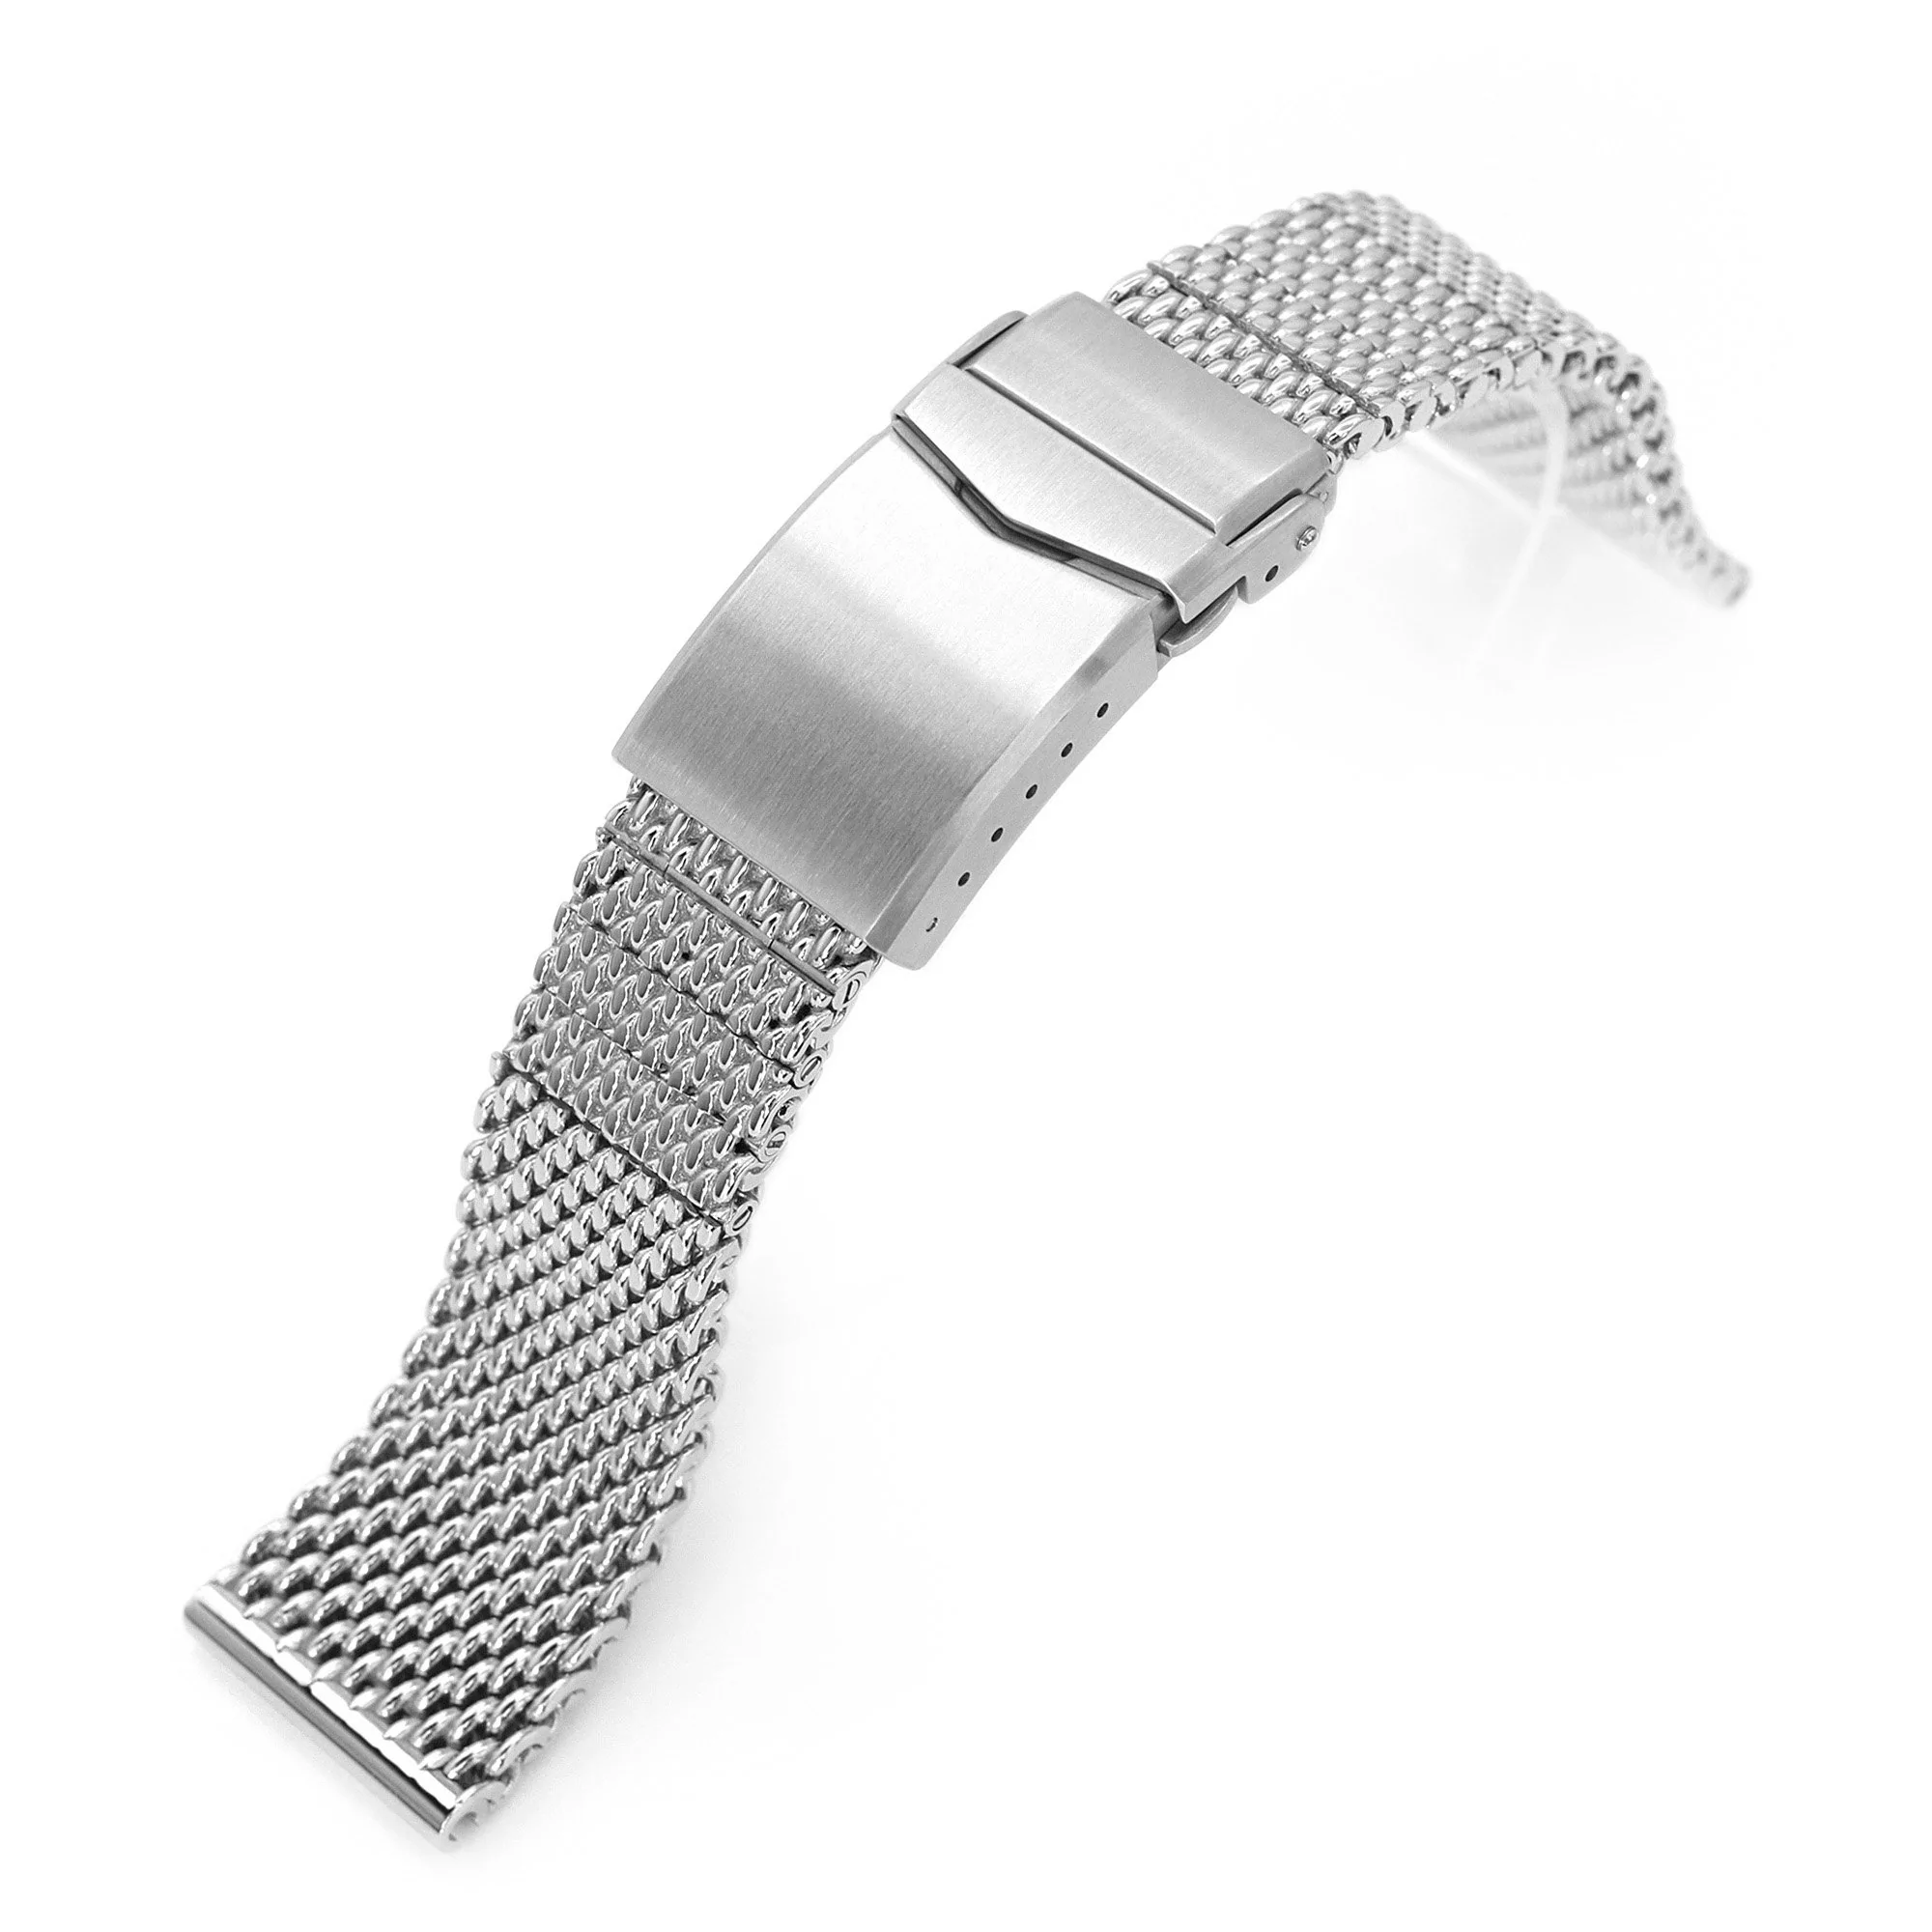 20mm, 22mm Solid End Massy Mesh Band Stainless Steel Watch